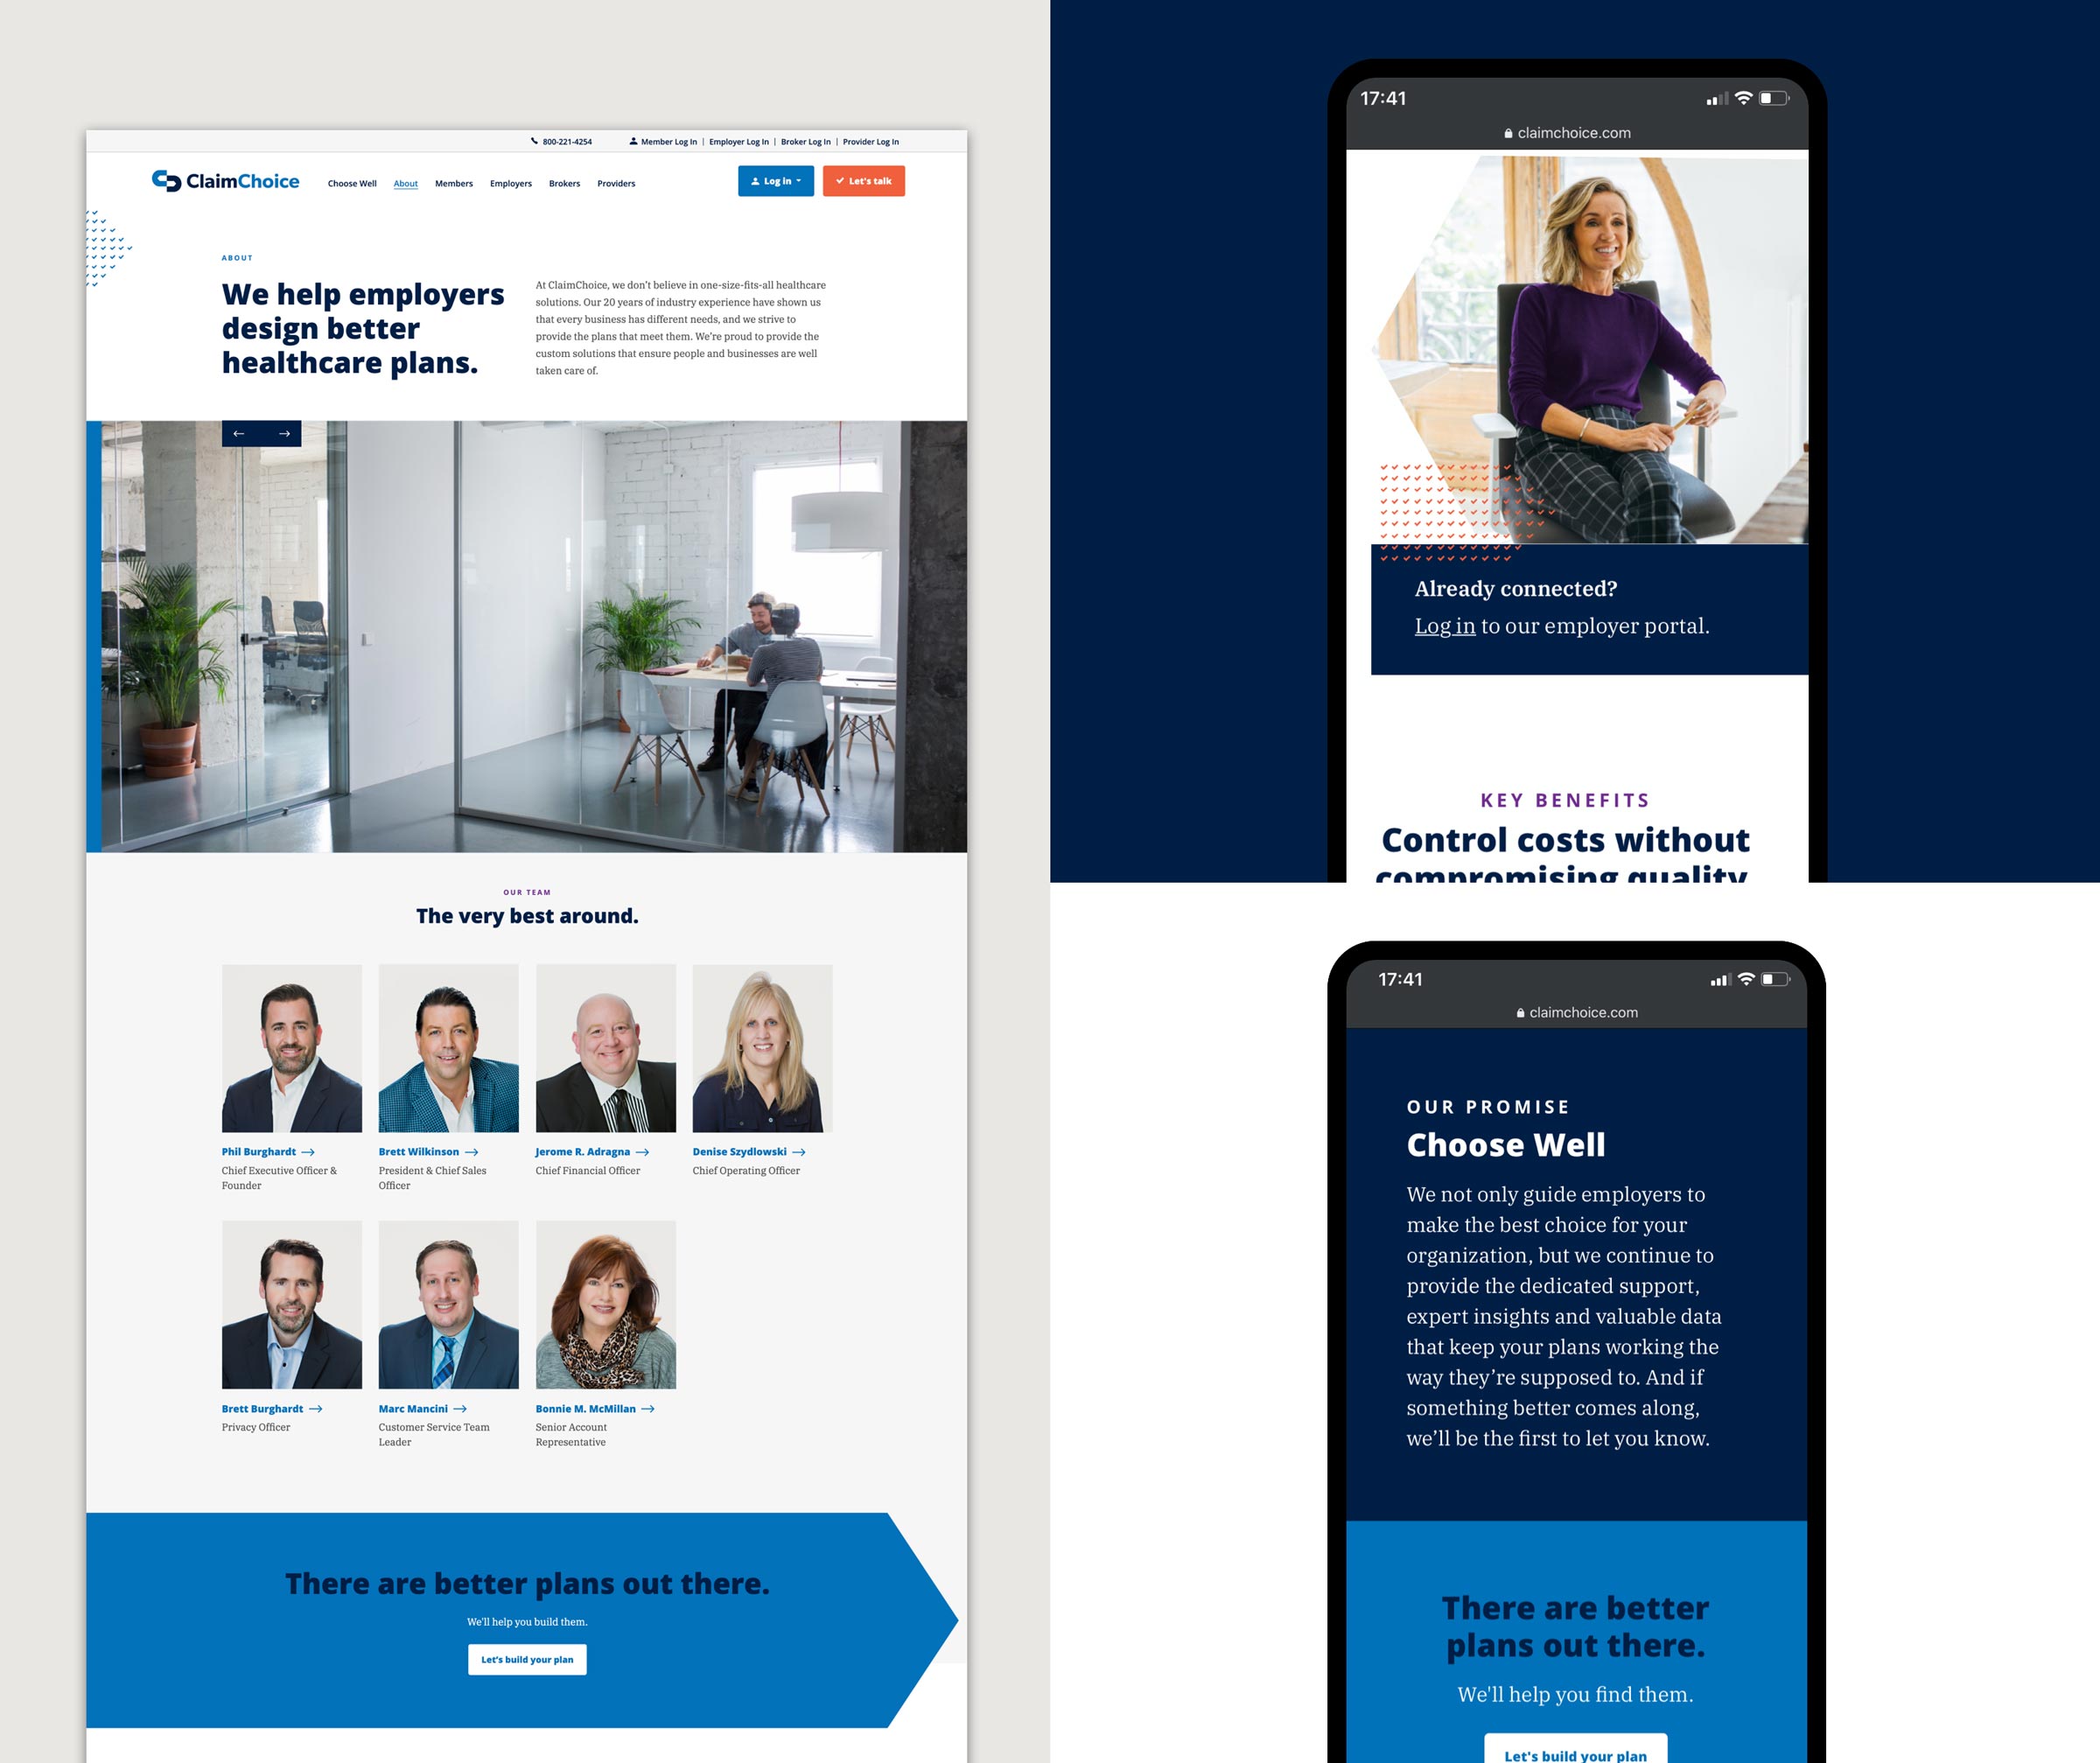 ClaimChoice's website design on mobile